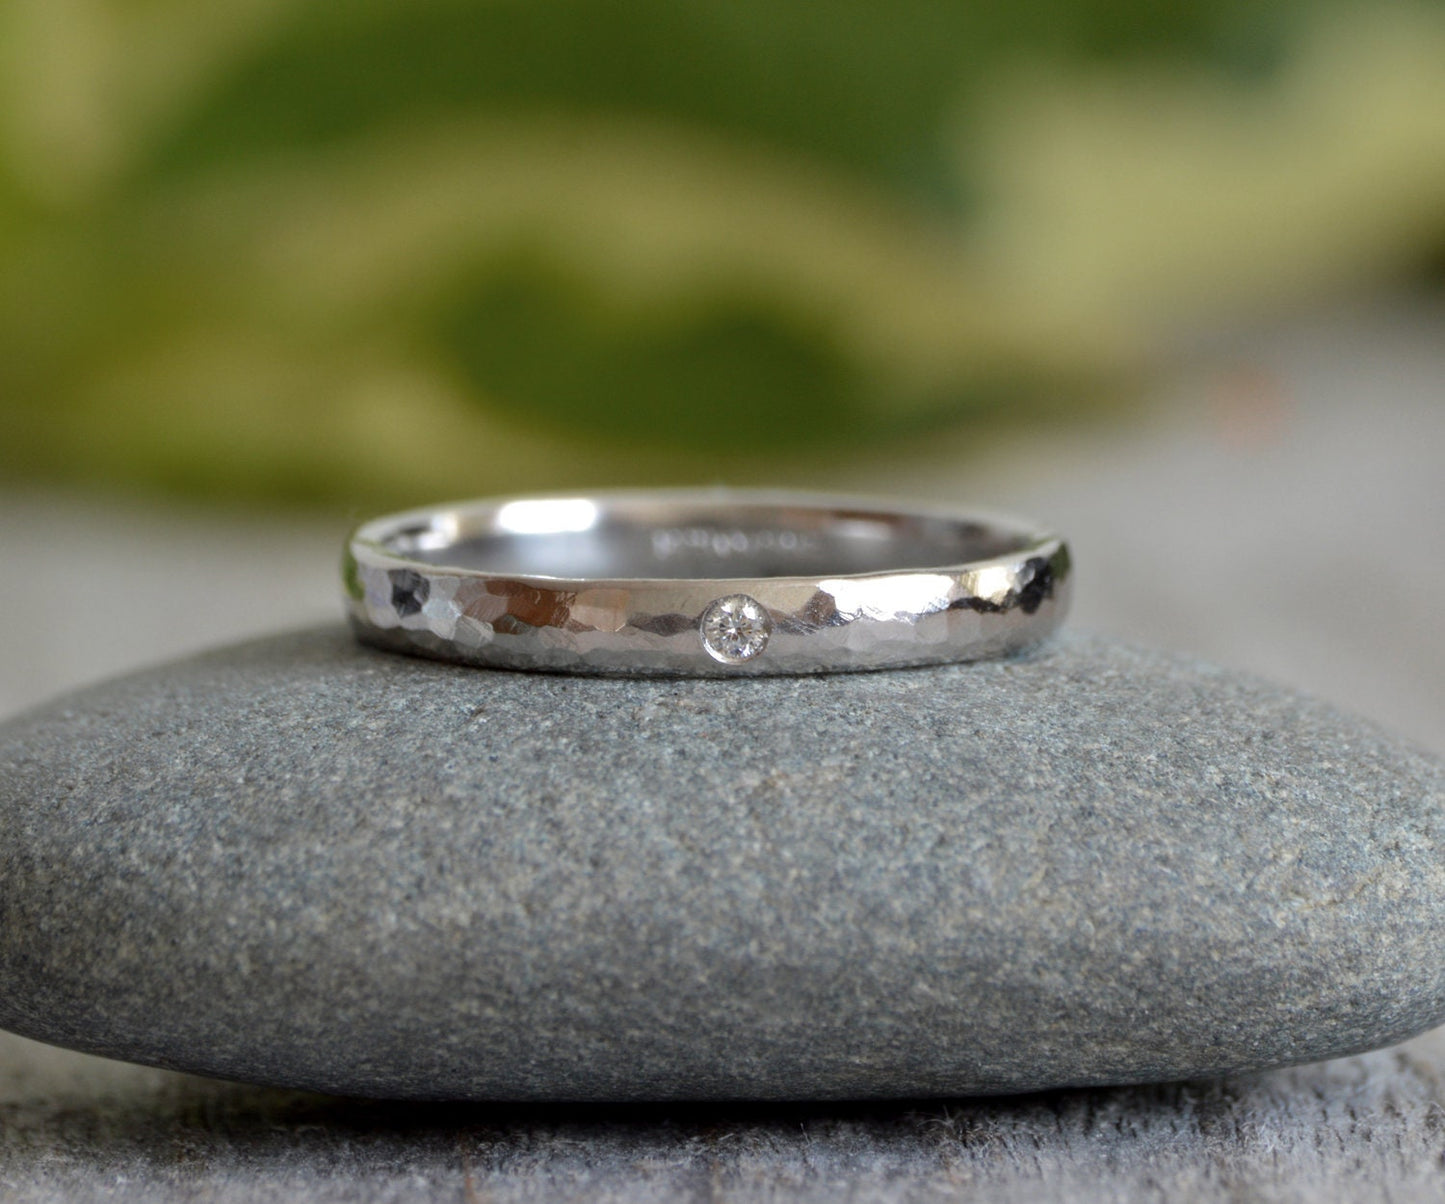 Hammered Effect Platinum Wedding Band with A Diamond, Platinum Wedding Ring With Diamond, Rustic Wedding Band, Made To Order